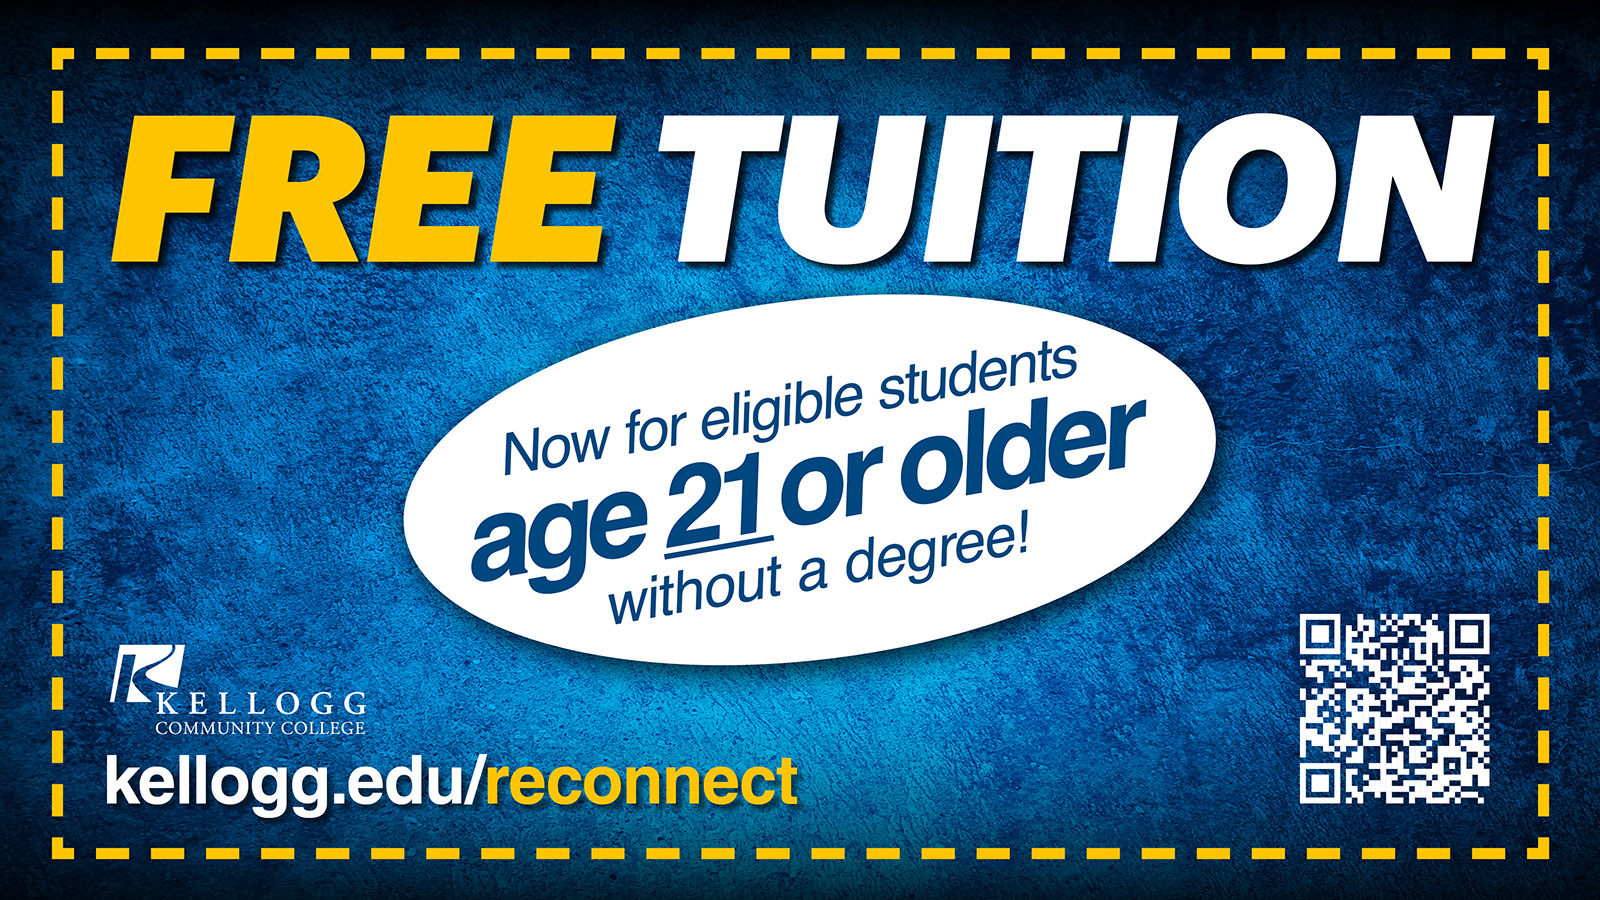 A text slide that reads, "Free tuition. Now for eligible students age 21 or older without a degree! kellogg.edu/reconnect."